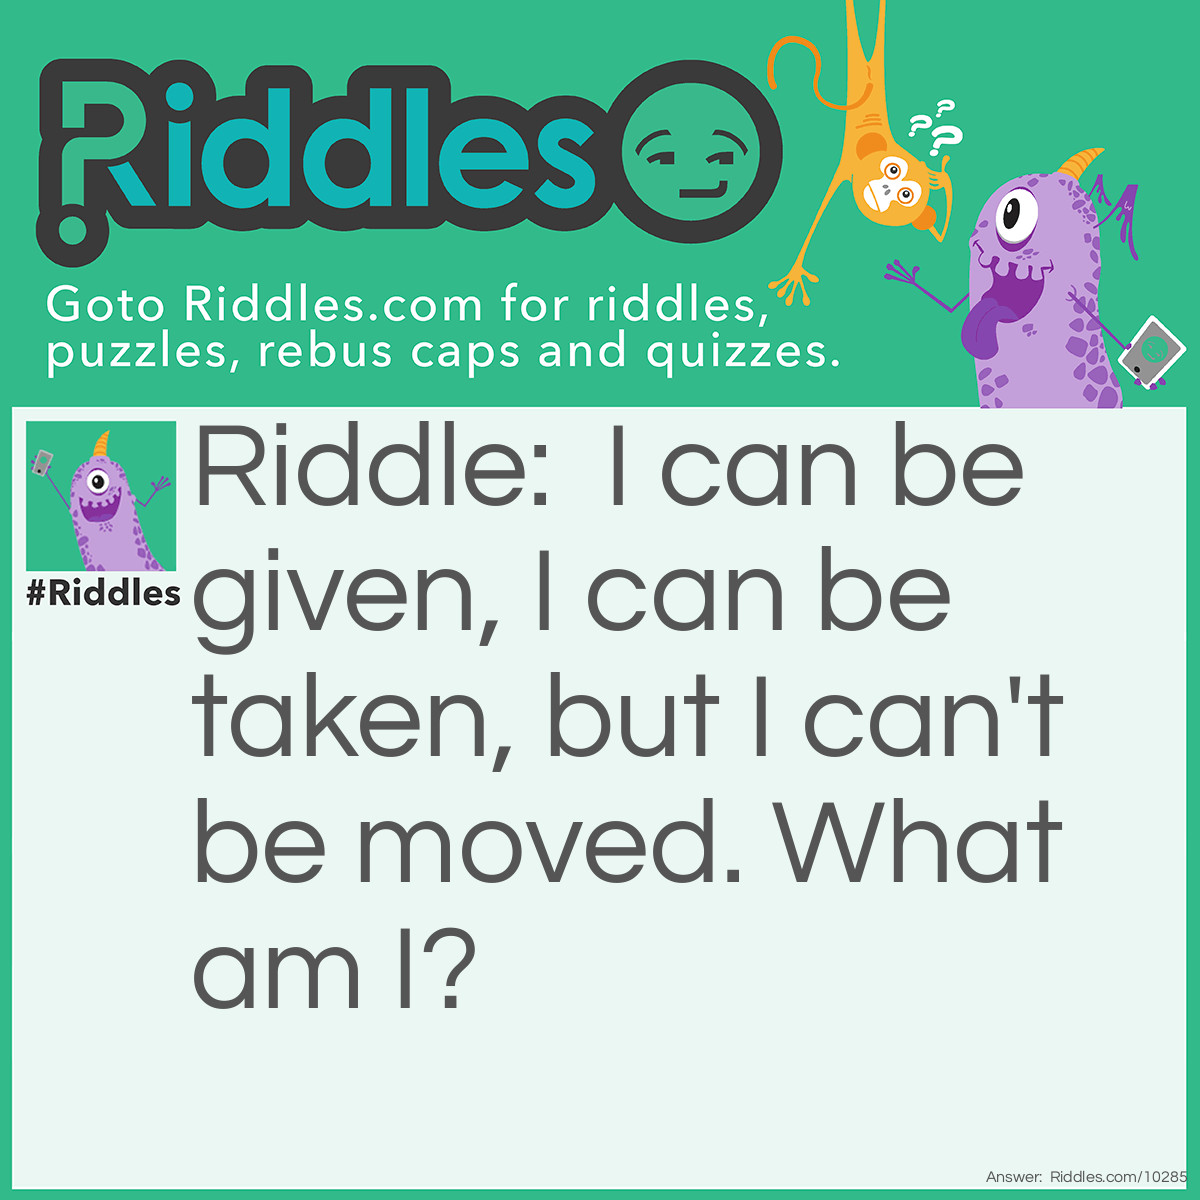 Riddle: I can be given, I can be taken, but I can't be moved. What am I? Answer: A bath.